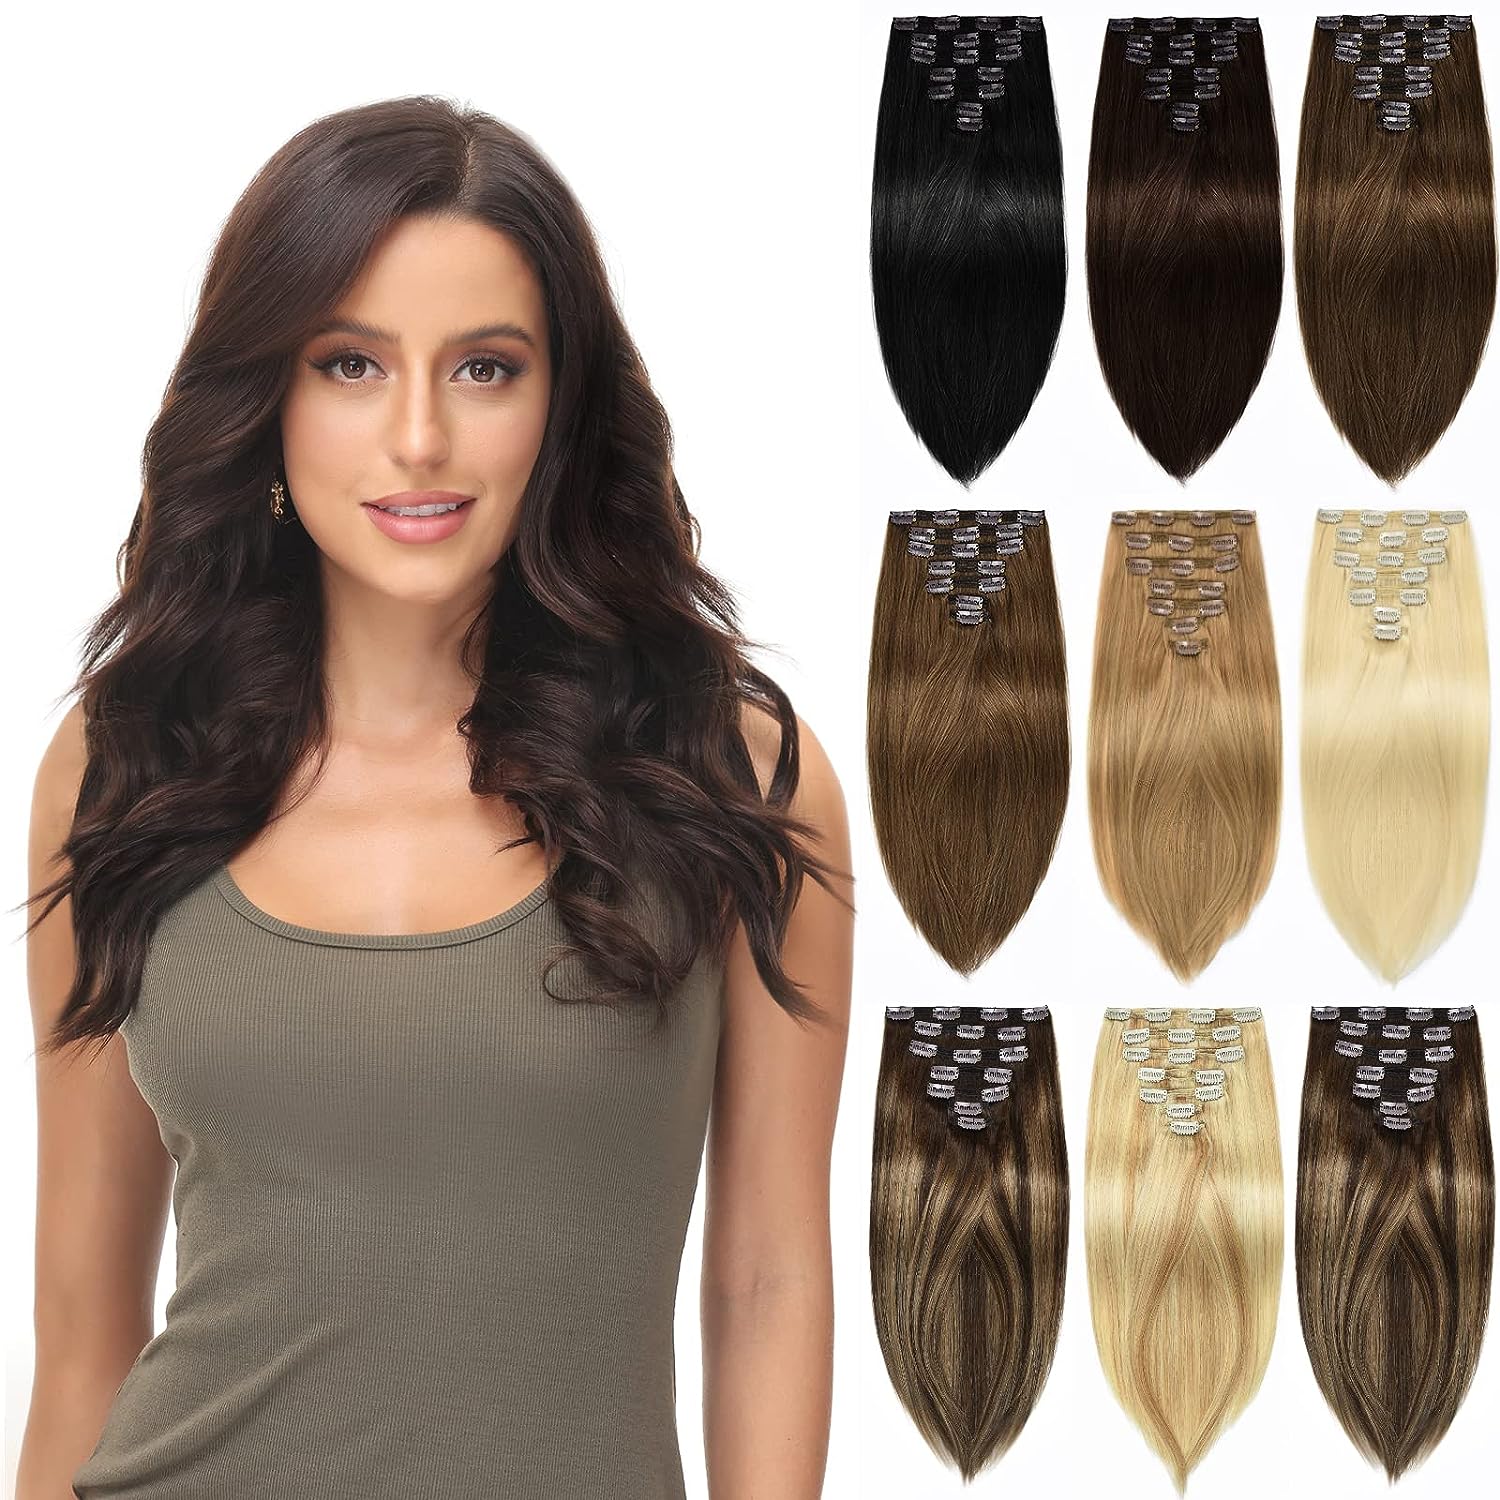 Rose bud Clip in Hair Extensions Real Human Hair 7Pcs [...]